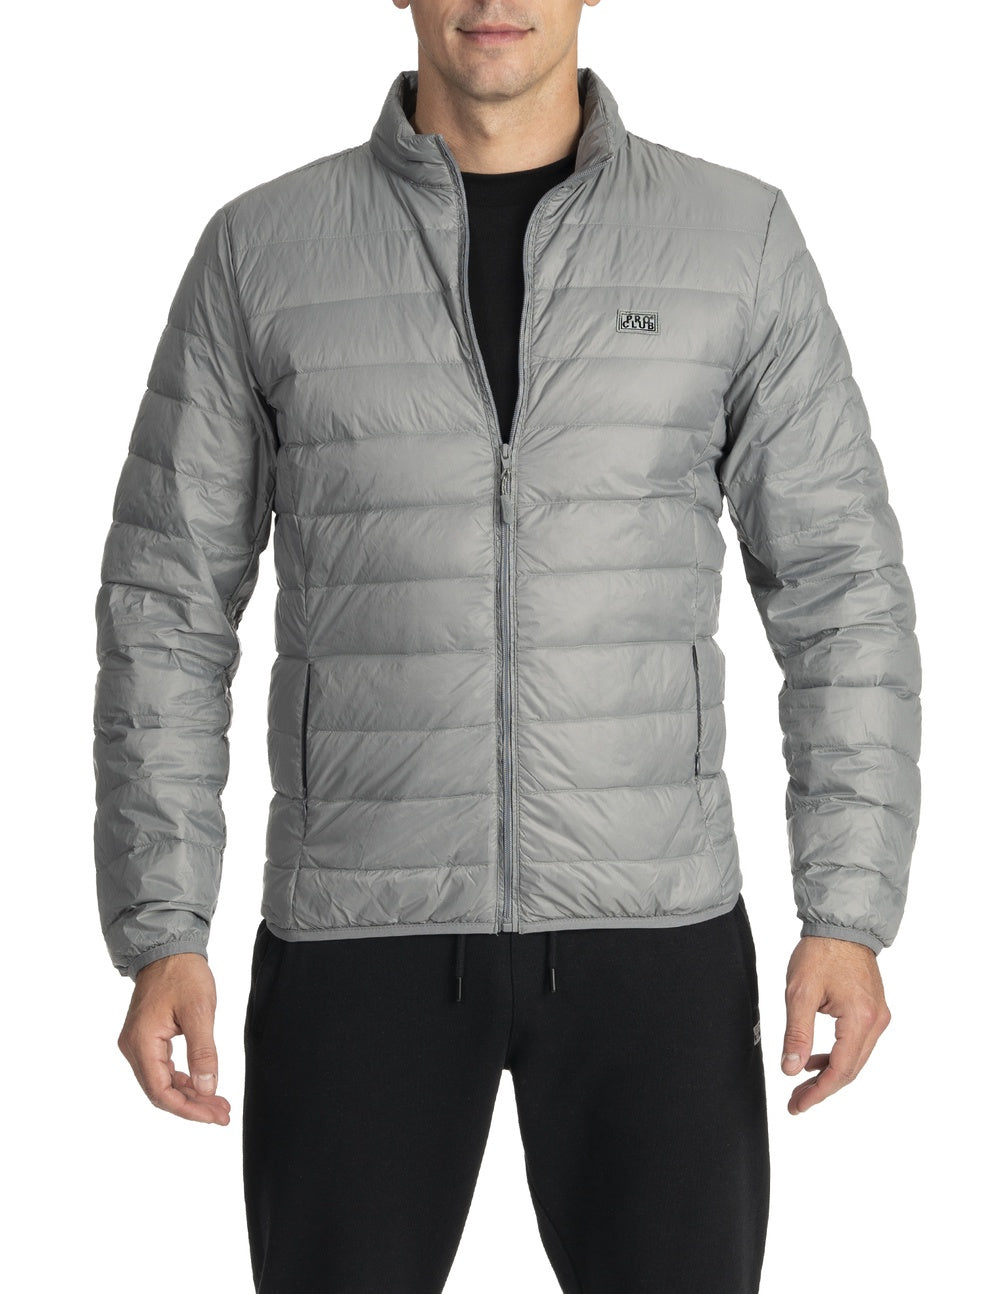 Pro Club Packable Lightweight Down Jacket - GRAY